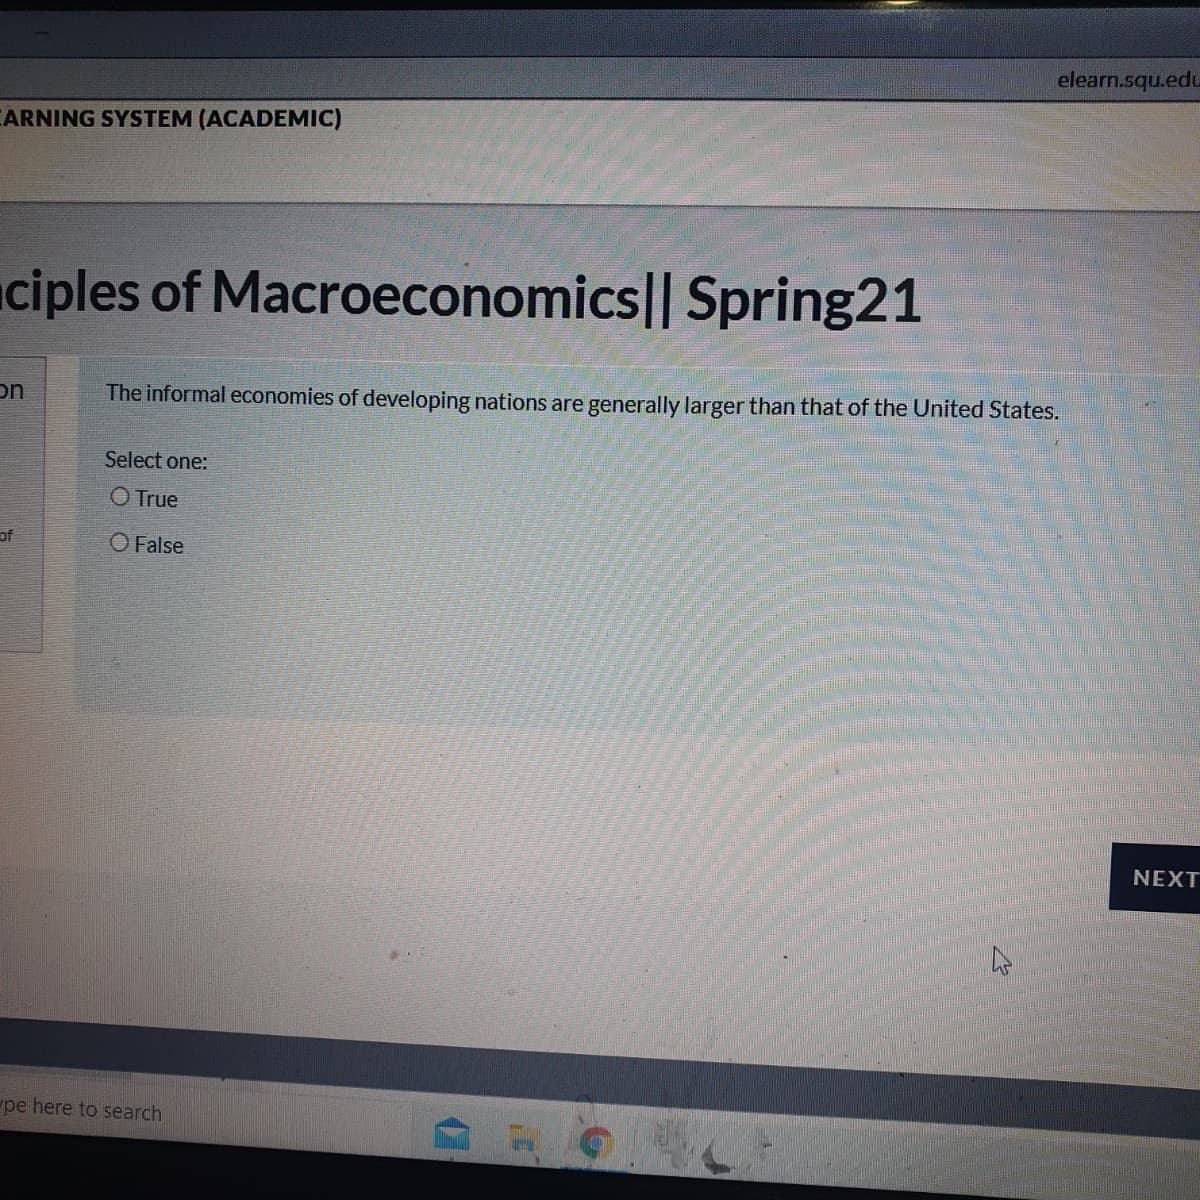 elearn.squ.edu
CARNING SYSTEM (ACADEMC)
ciples of Macroeconomics|| Spring21
on
The informal economies of developing nations are generally larger than that of the United States.
Select one:
O True
of
O False
NEXT
pe here to search
